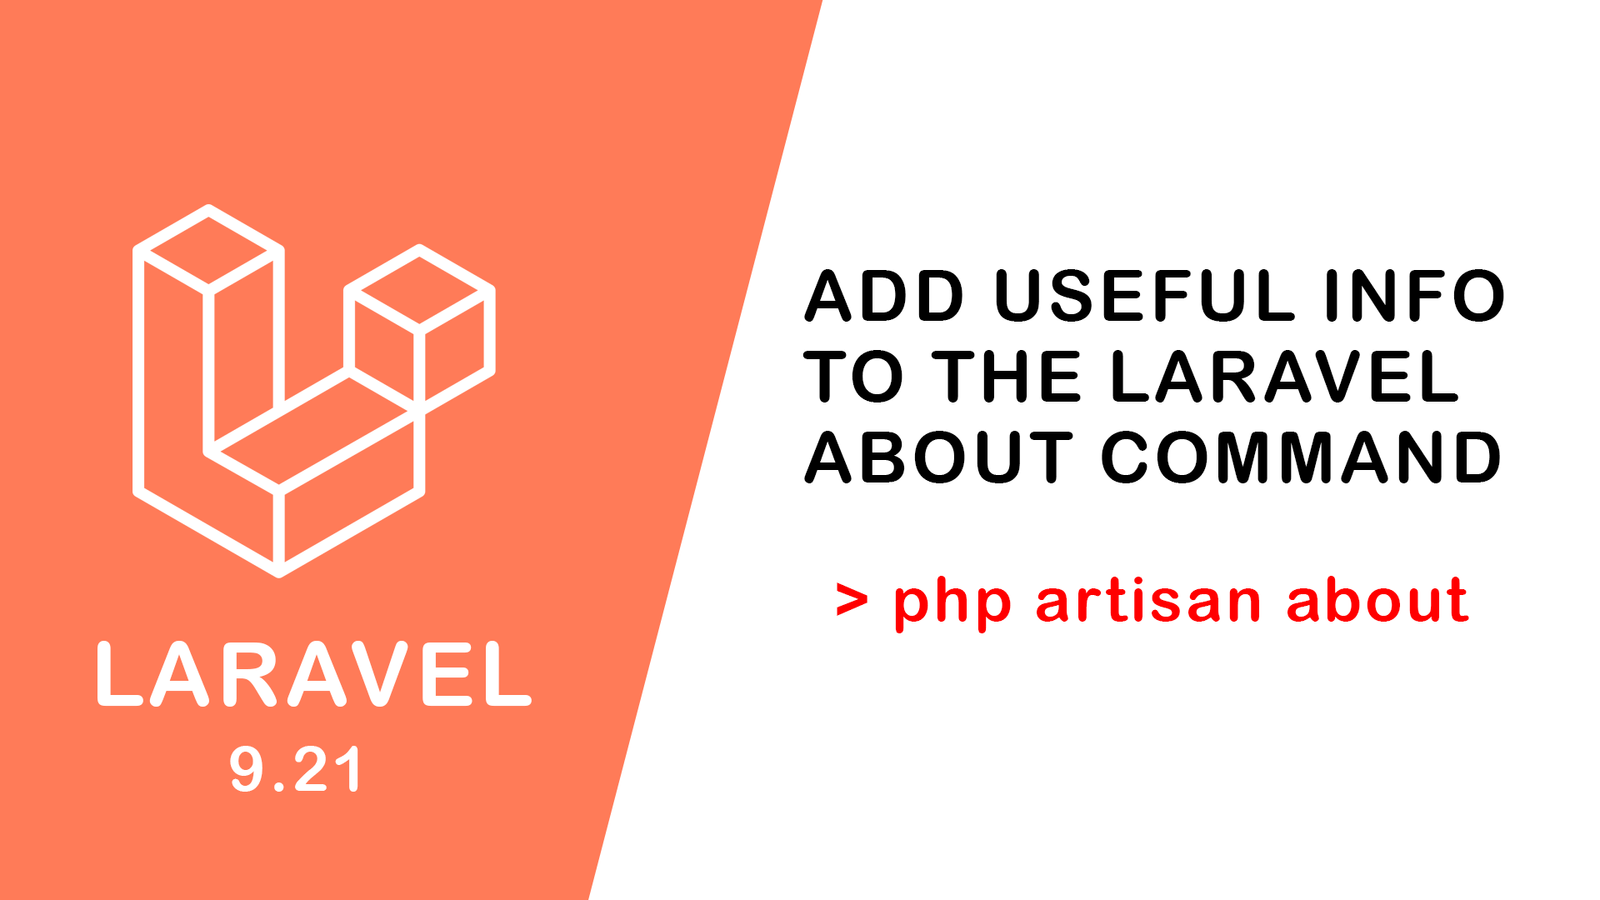 Add Useful Info to the Laravel About Command